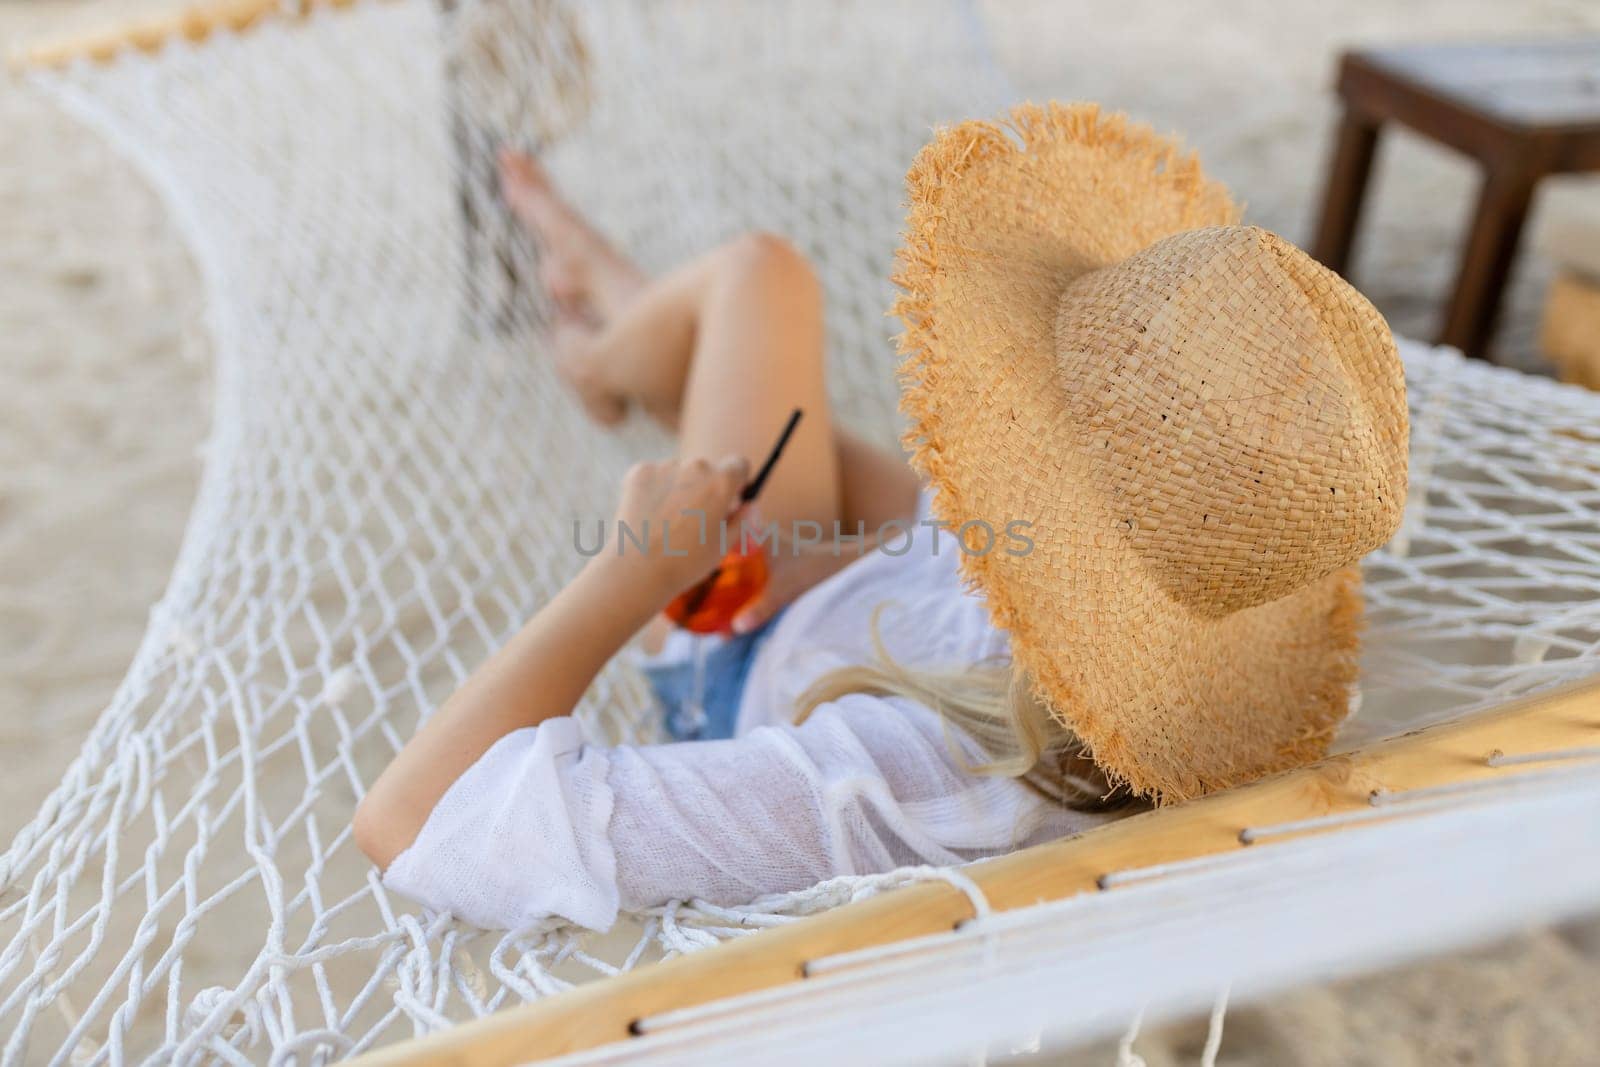 woman with cocktail relaxed in hammock.